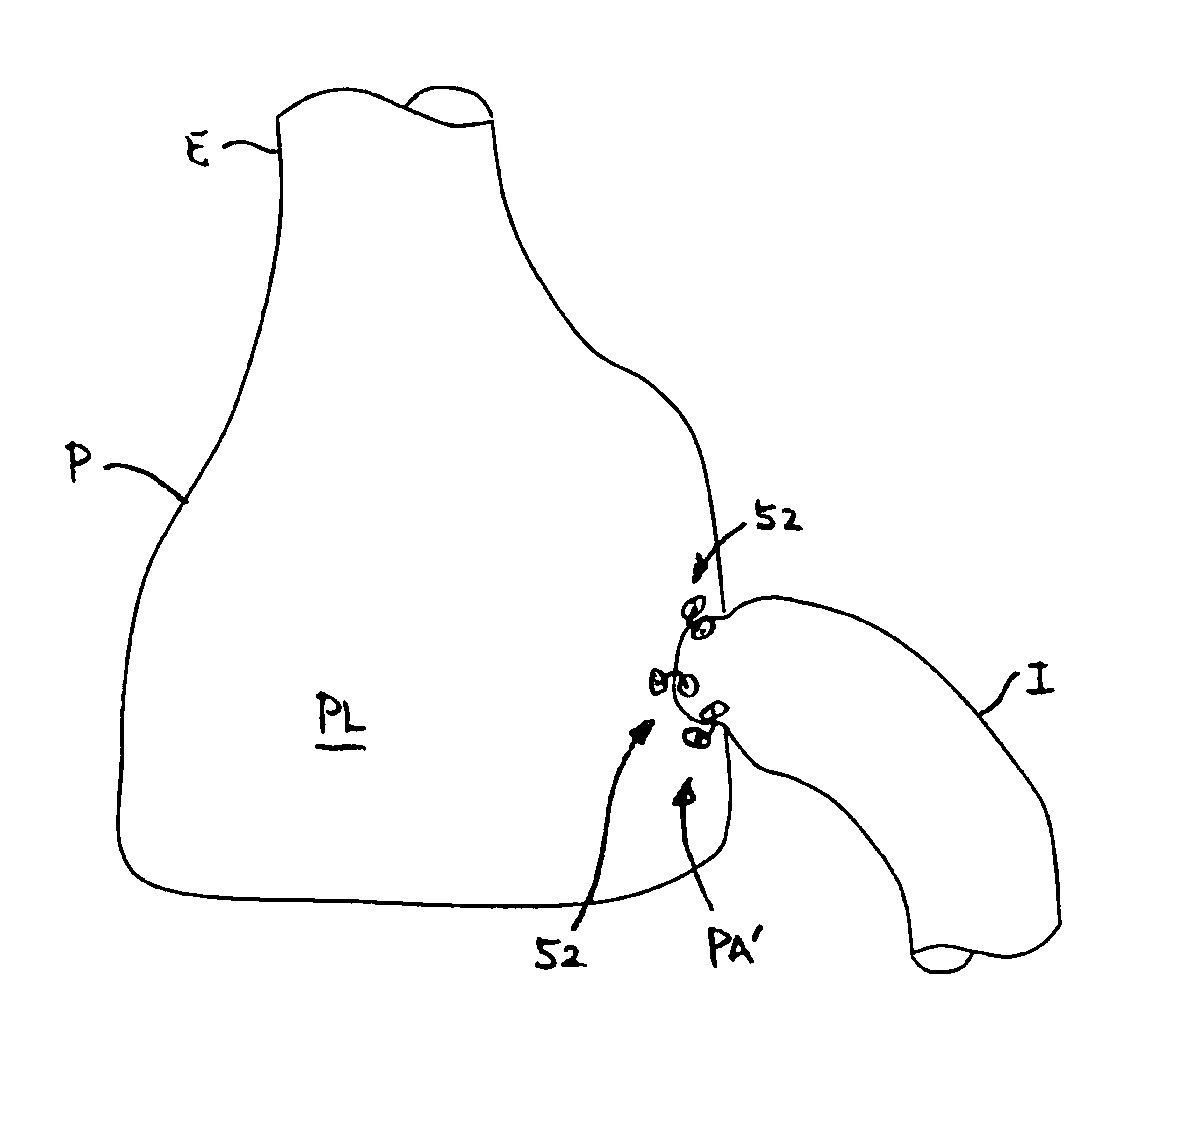 Methods and apparatus for revision of obesity procedures